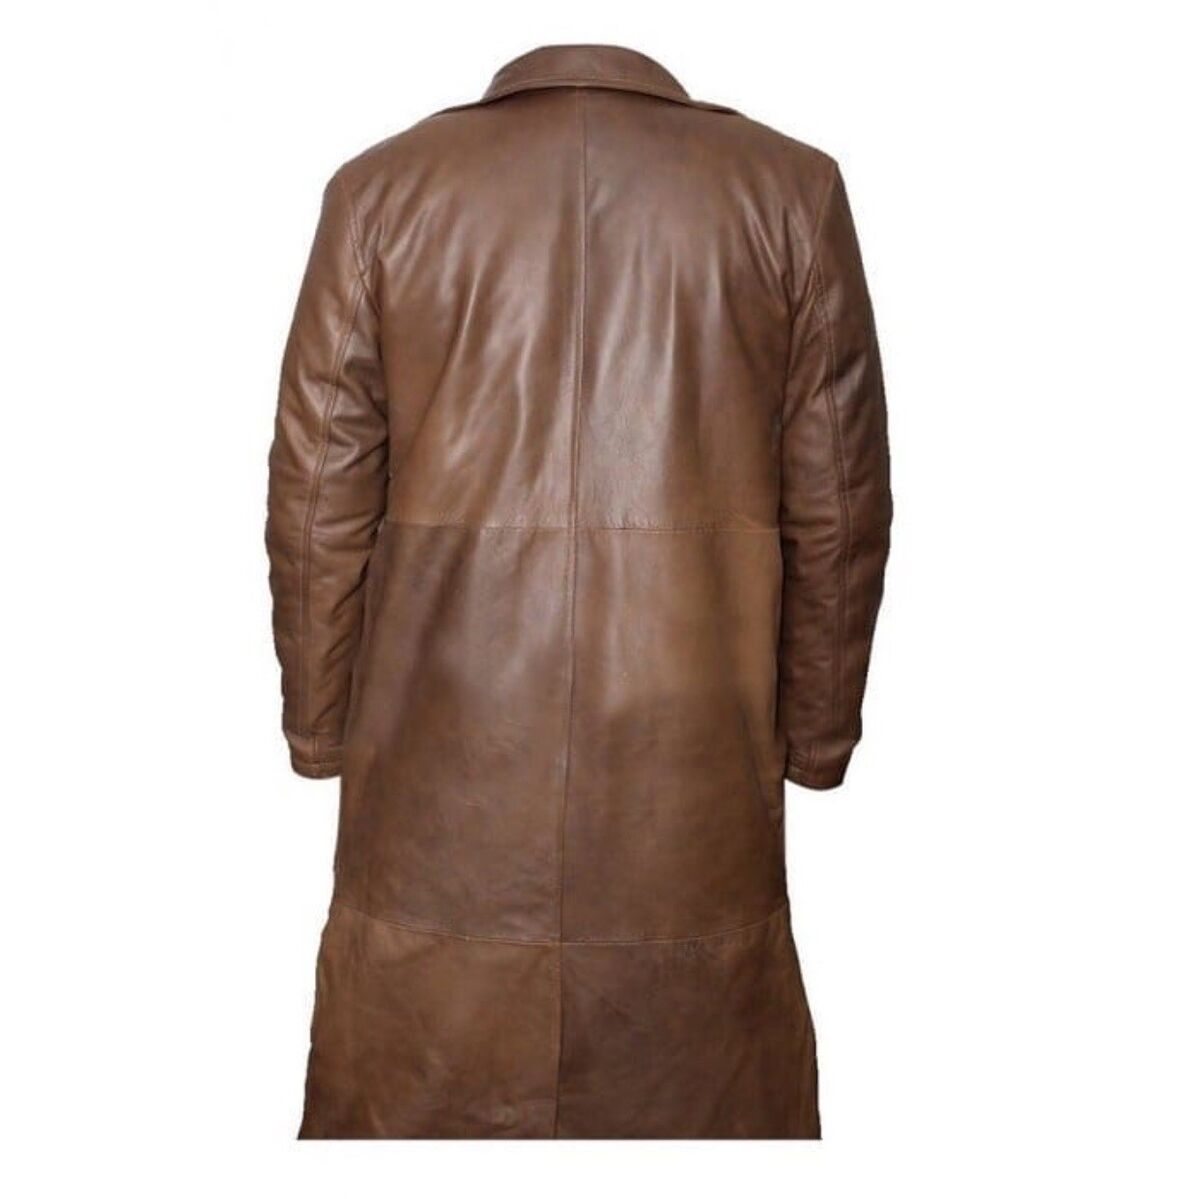 MEN VINTAGE BROWN GENUINE LEATHER JACKET, DUSTER COAT MILITARY STYLE TRENCH  COAT